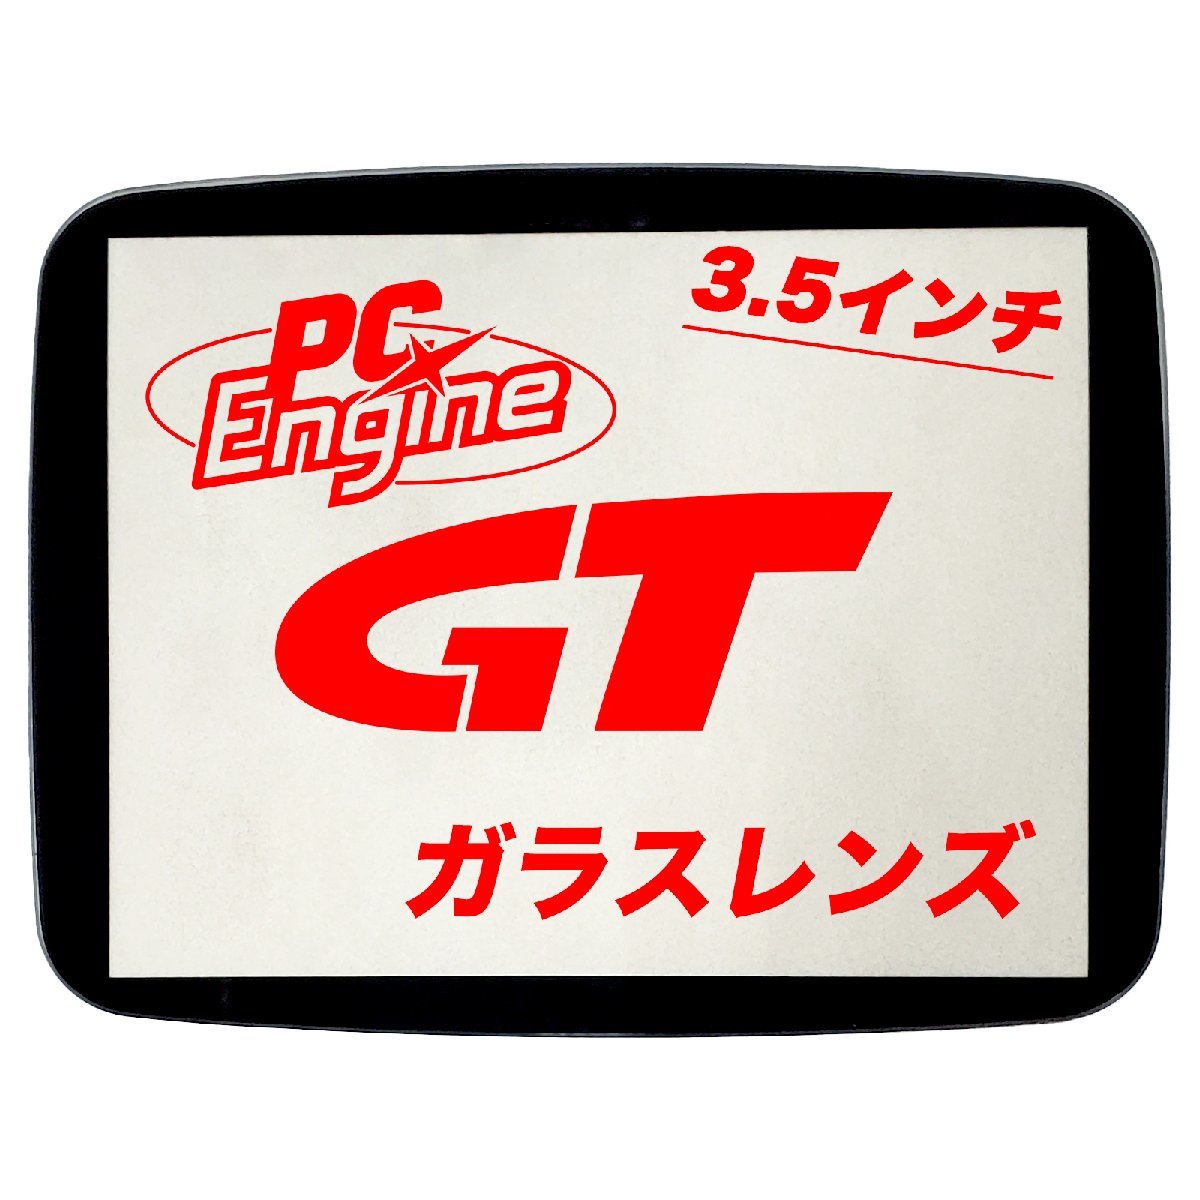 PC engine GT LCDDRV 3.5 inch liquid crystal modified for glass lens (LOGO none )